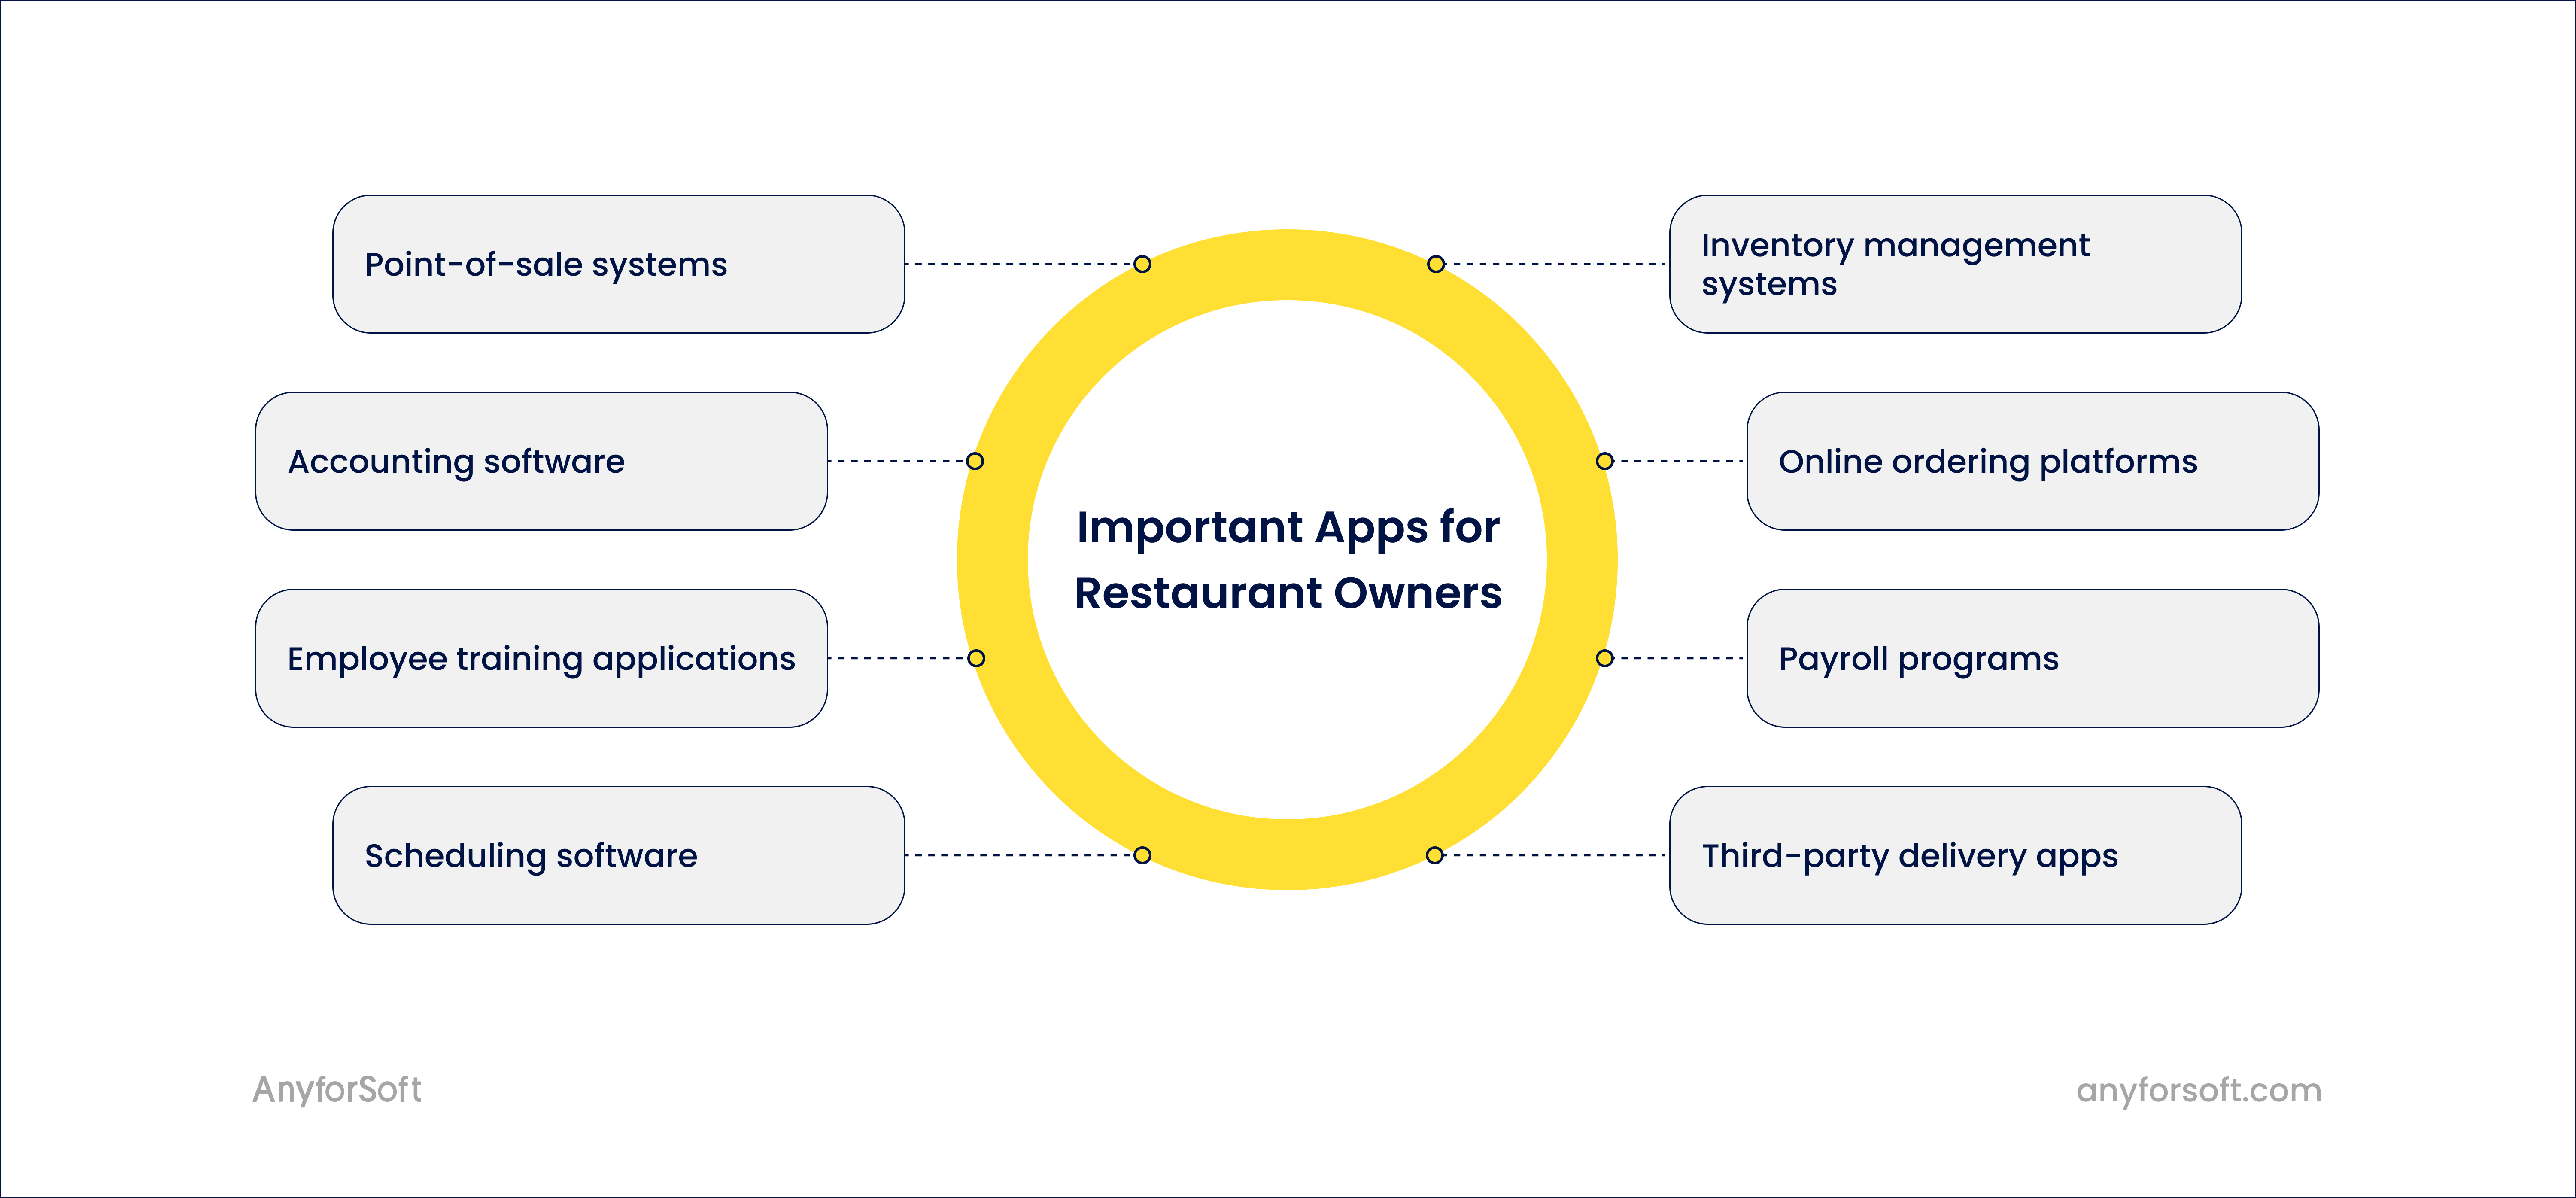 types of applications for restaurant managers and owners